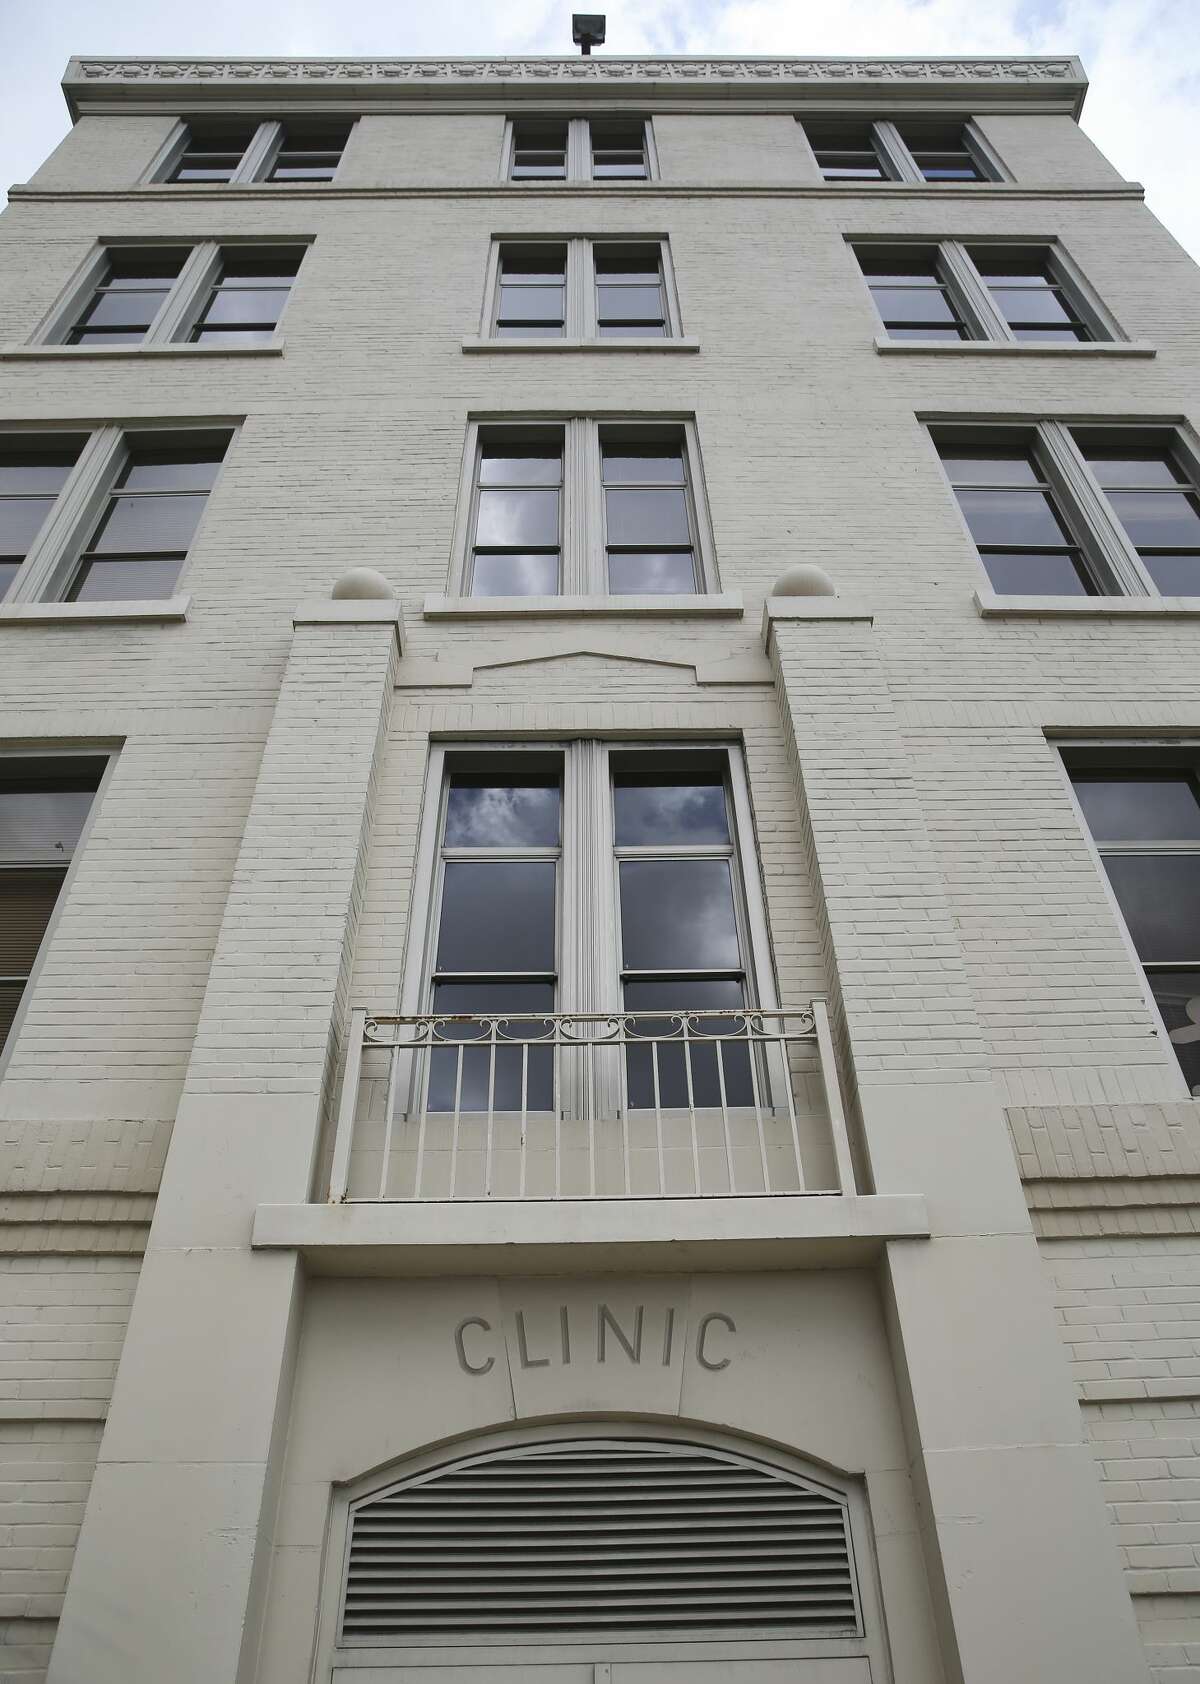 University Health's Board of Directors contracted with Munoz & Co. in January 2020 to figure out how best to renovate or restore the Robert B. Green hospital building - Bexar county's original hospital - that has been standing for more than 100 years. 